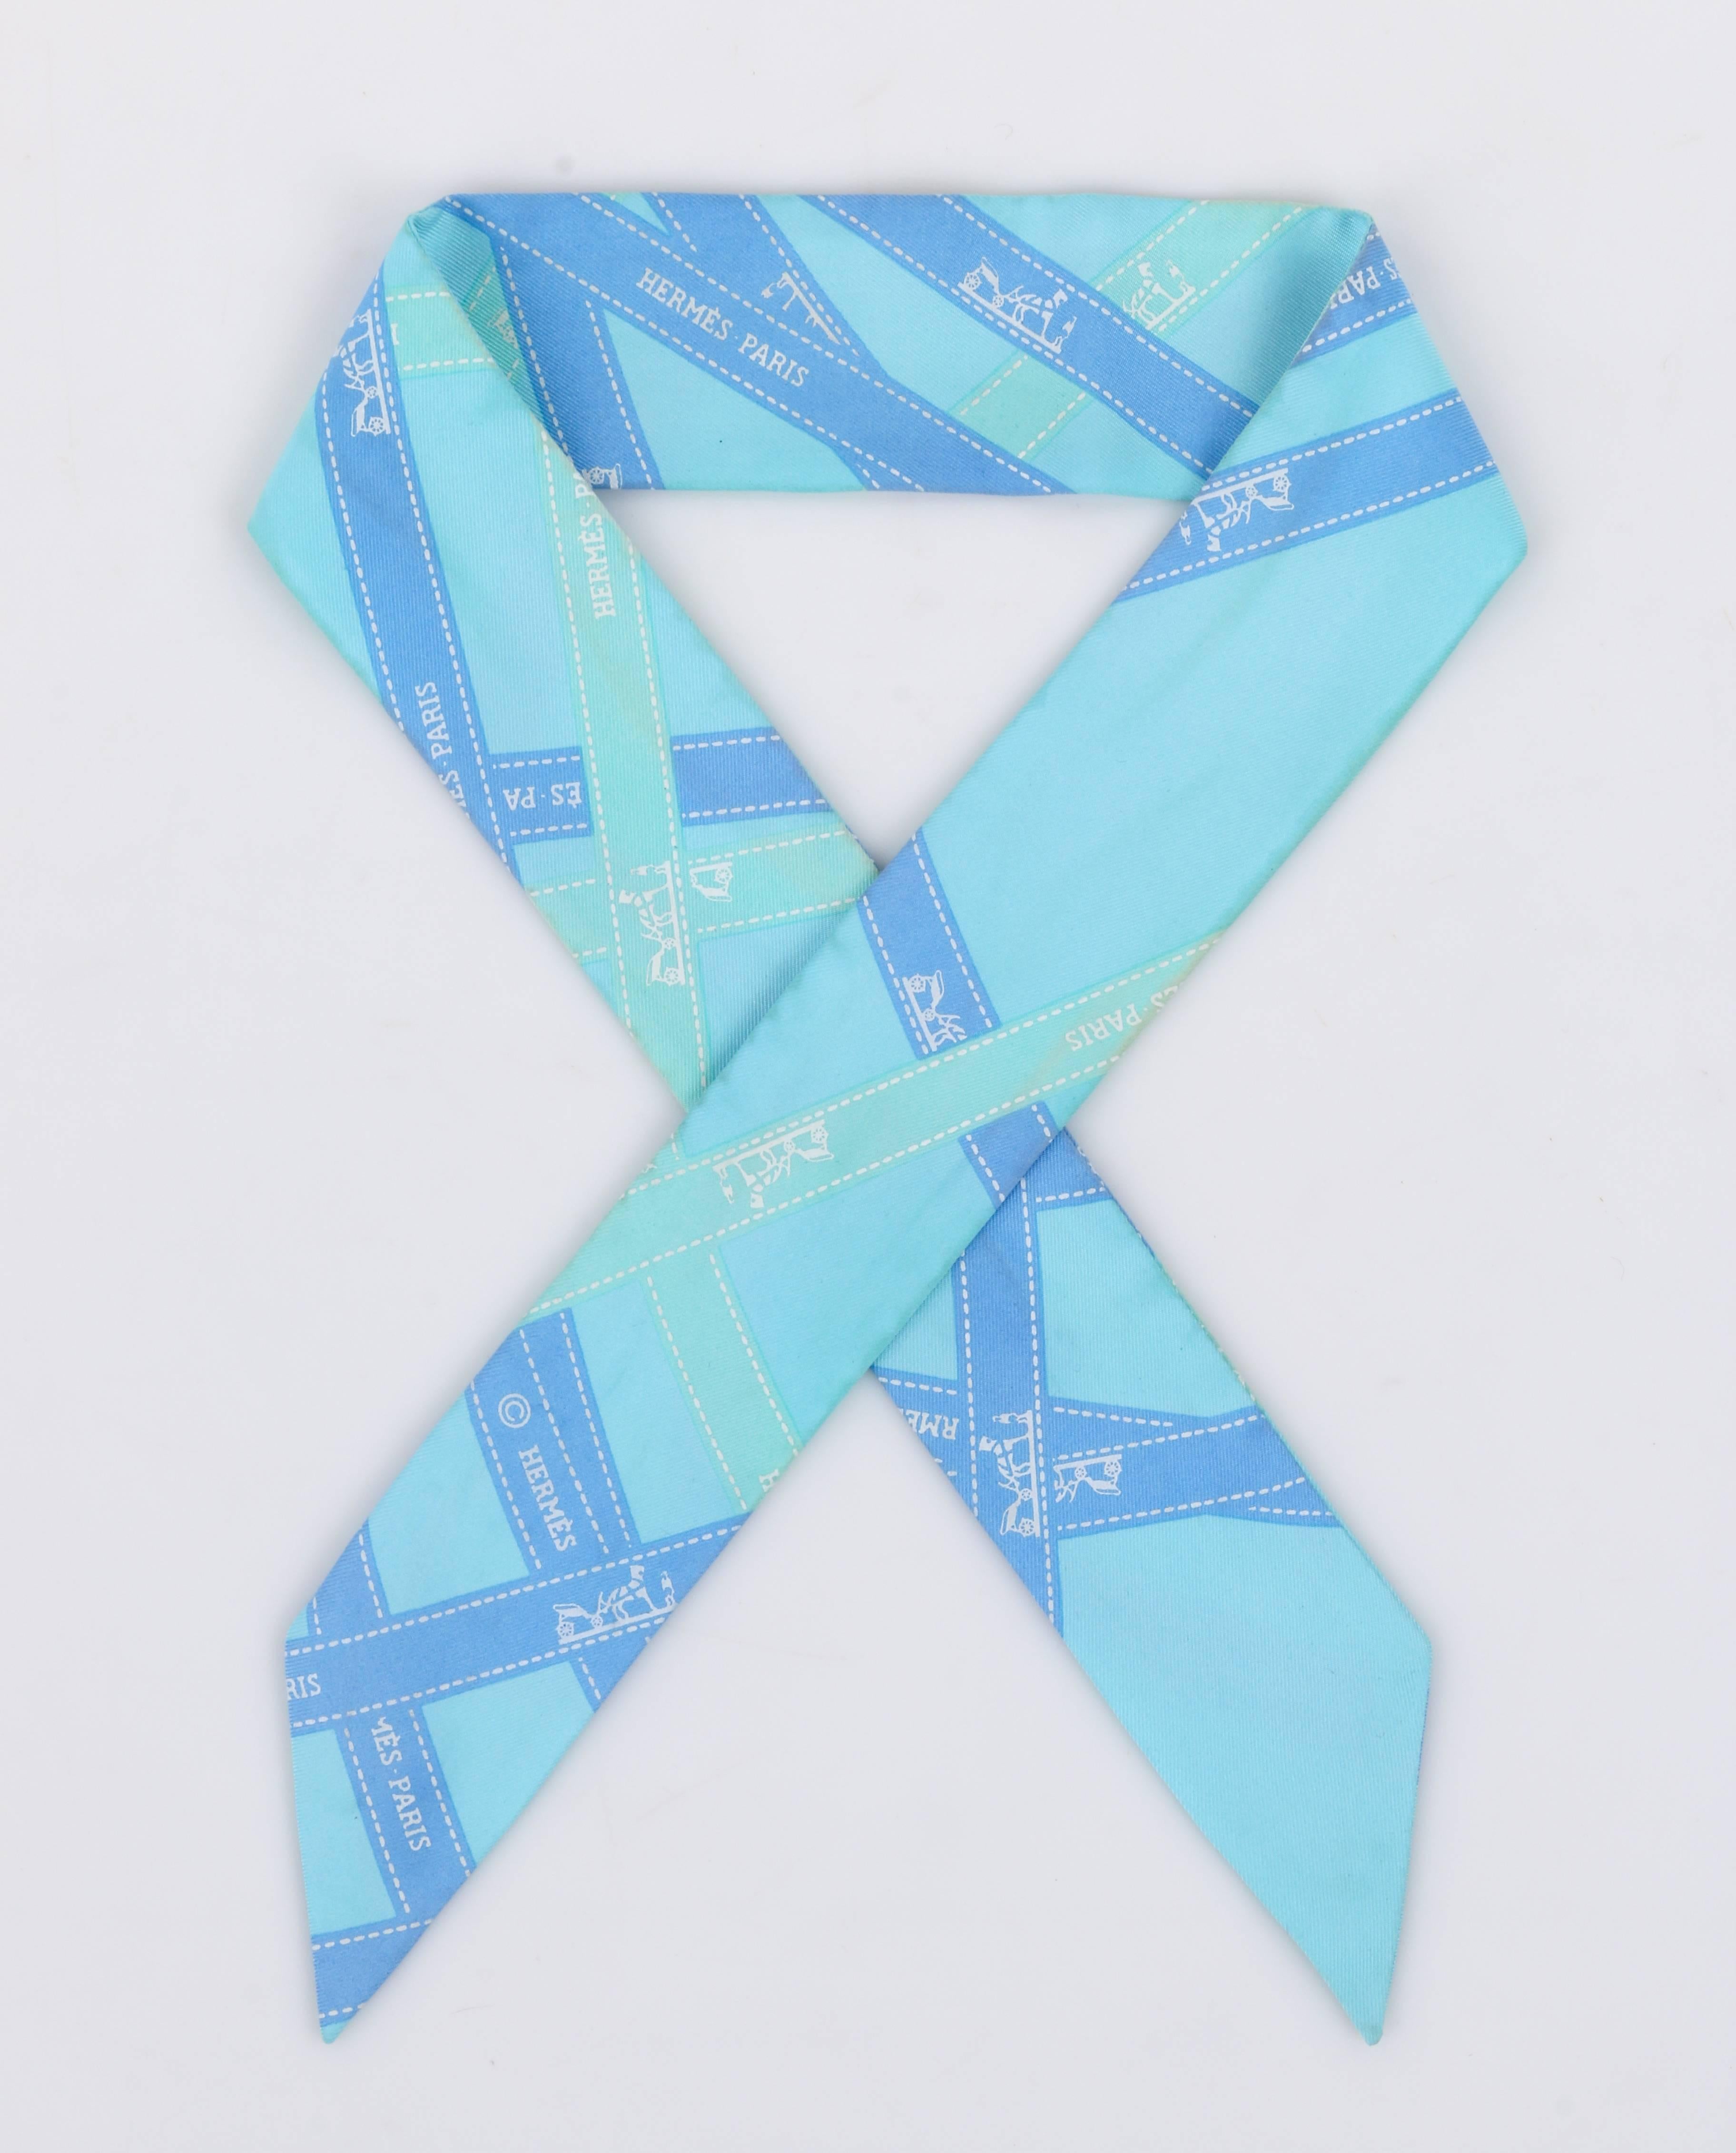 Hermes "Twilly" turquoise silk skinny scarf / neck tie. Hermes "Bolduc" (ribbon) print in shades of blue and aqua. Angled cut ends. Marked Fabric Content: "100% Silk". Measurements:

Length: 33"
Width: 1.875"